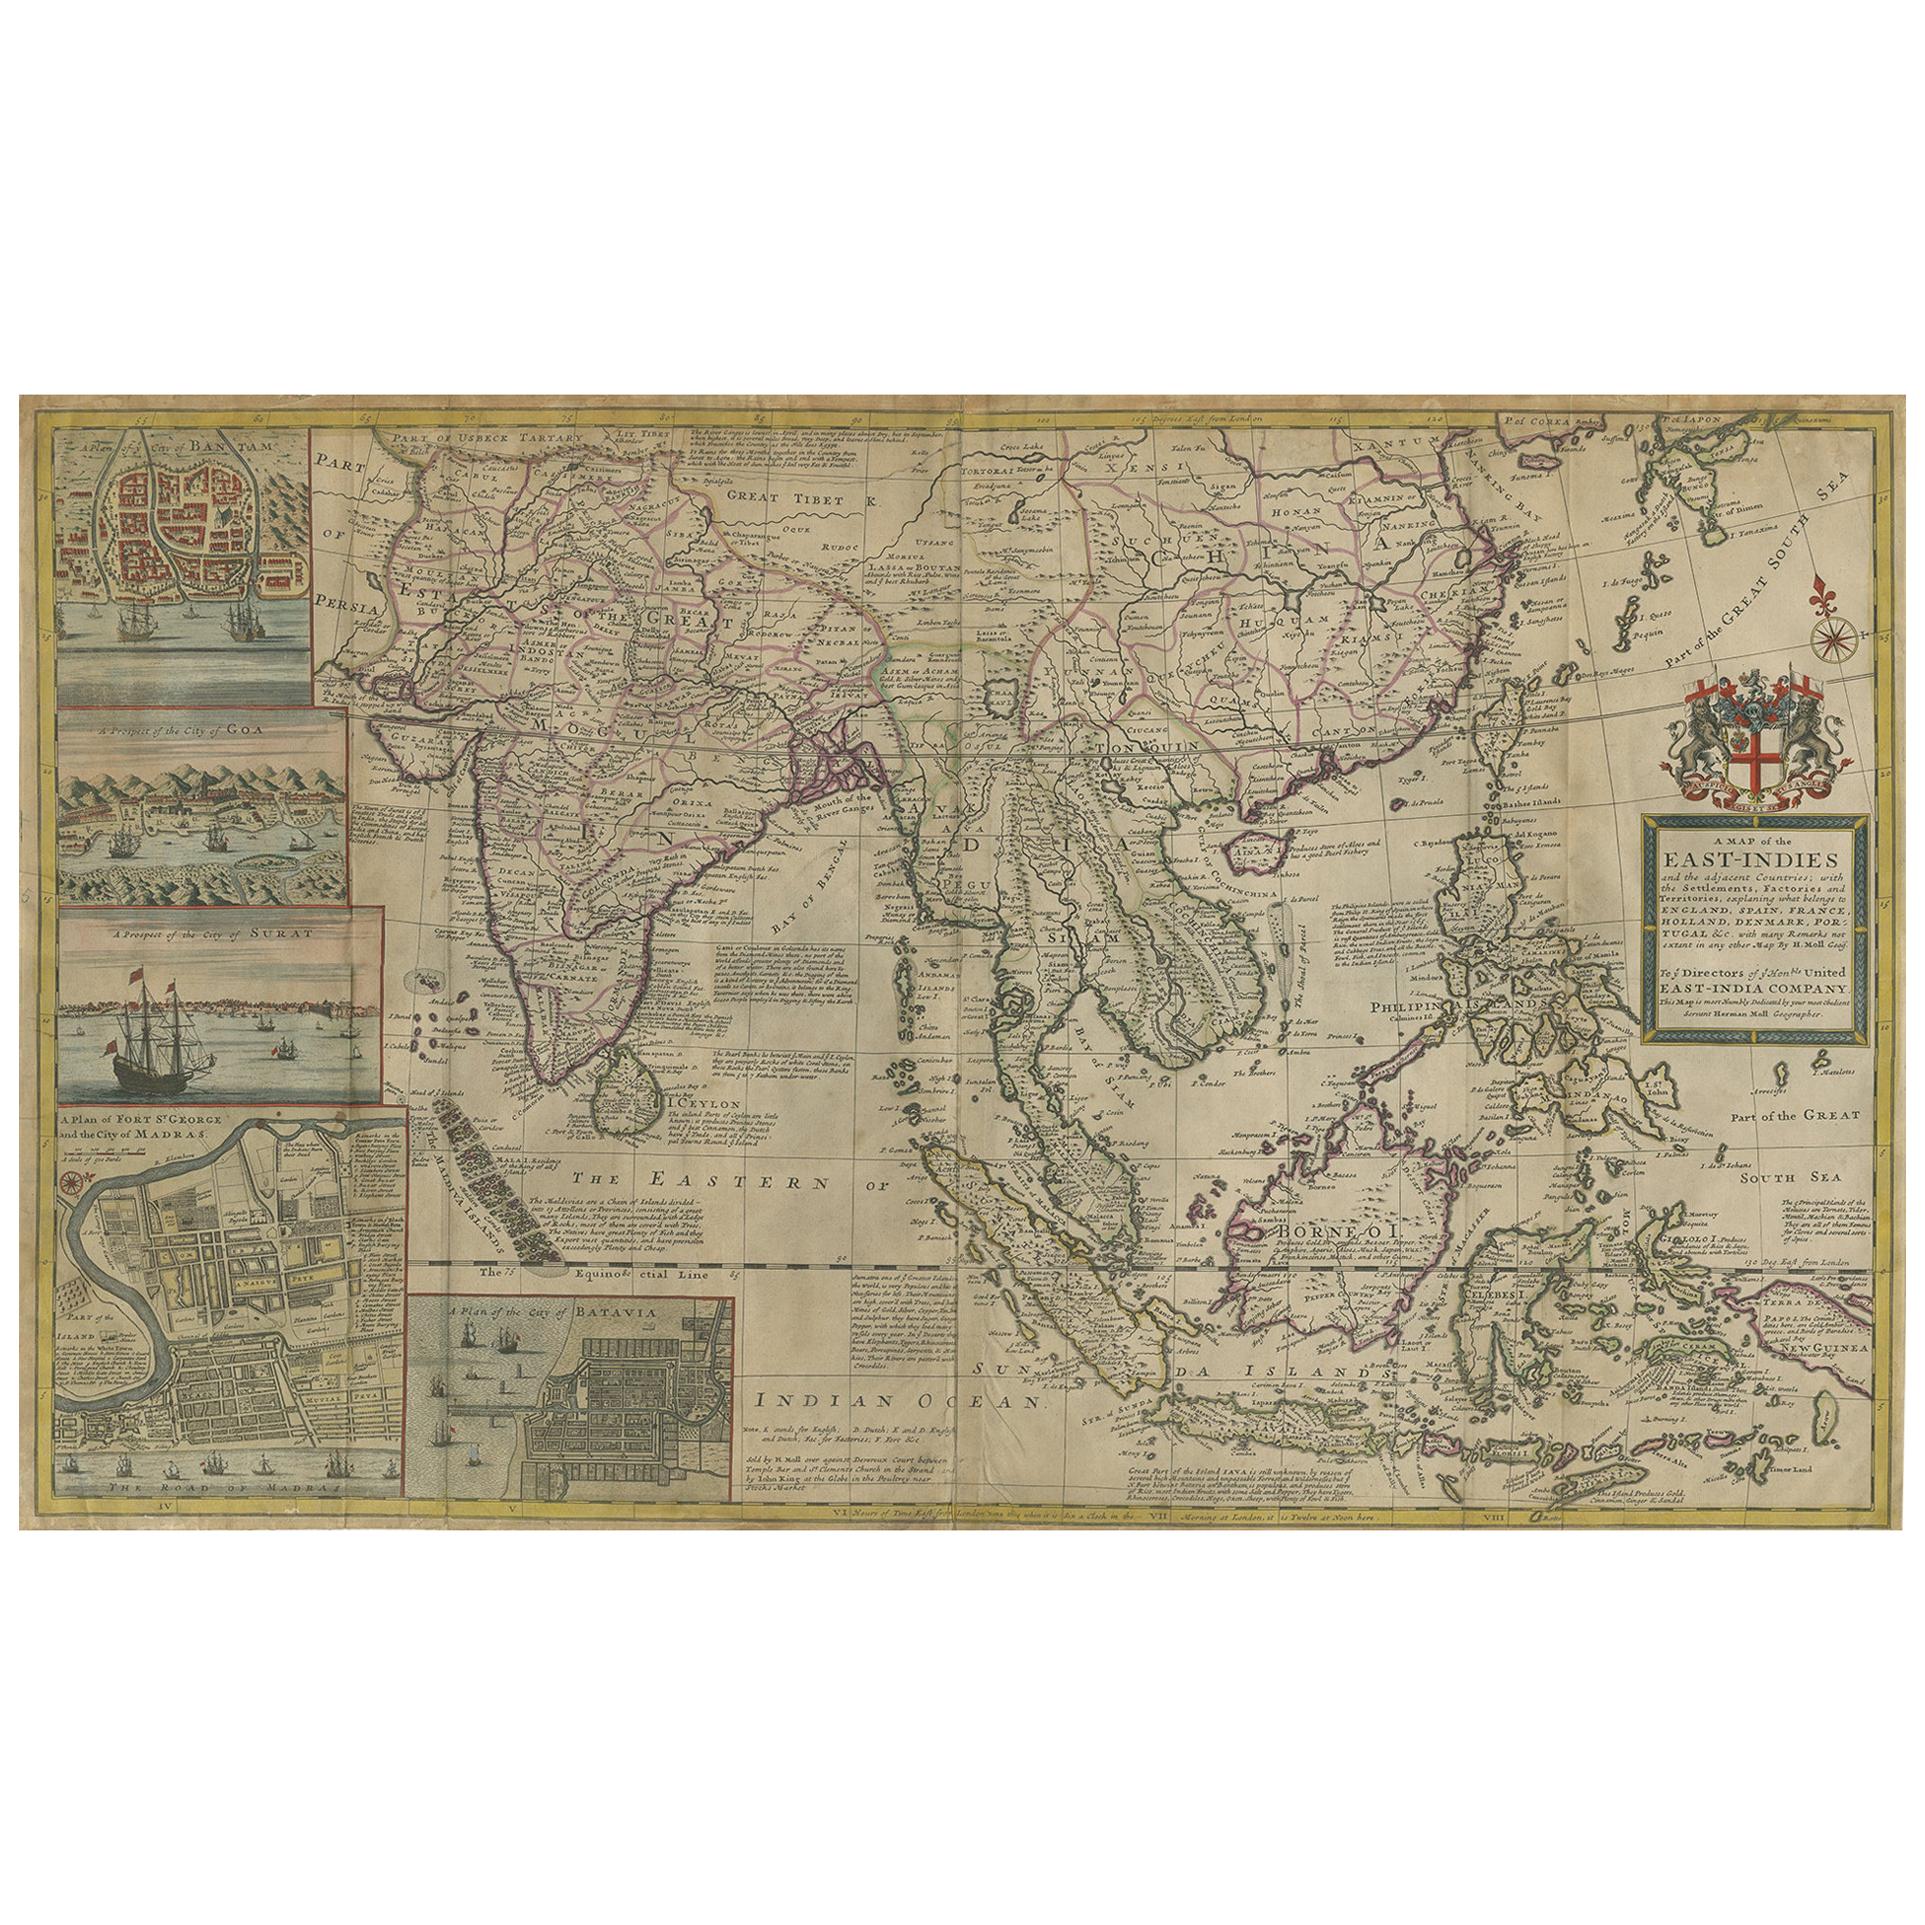 Antique Map of the East Indies by Moll 'circa 1726'